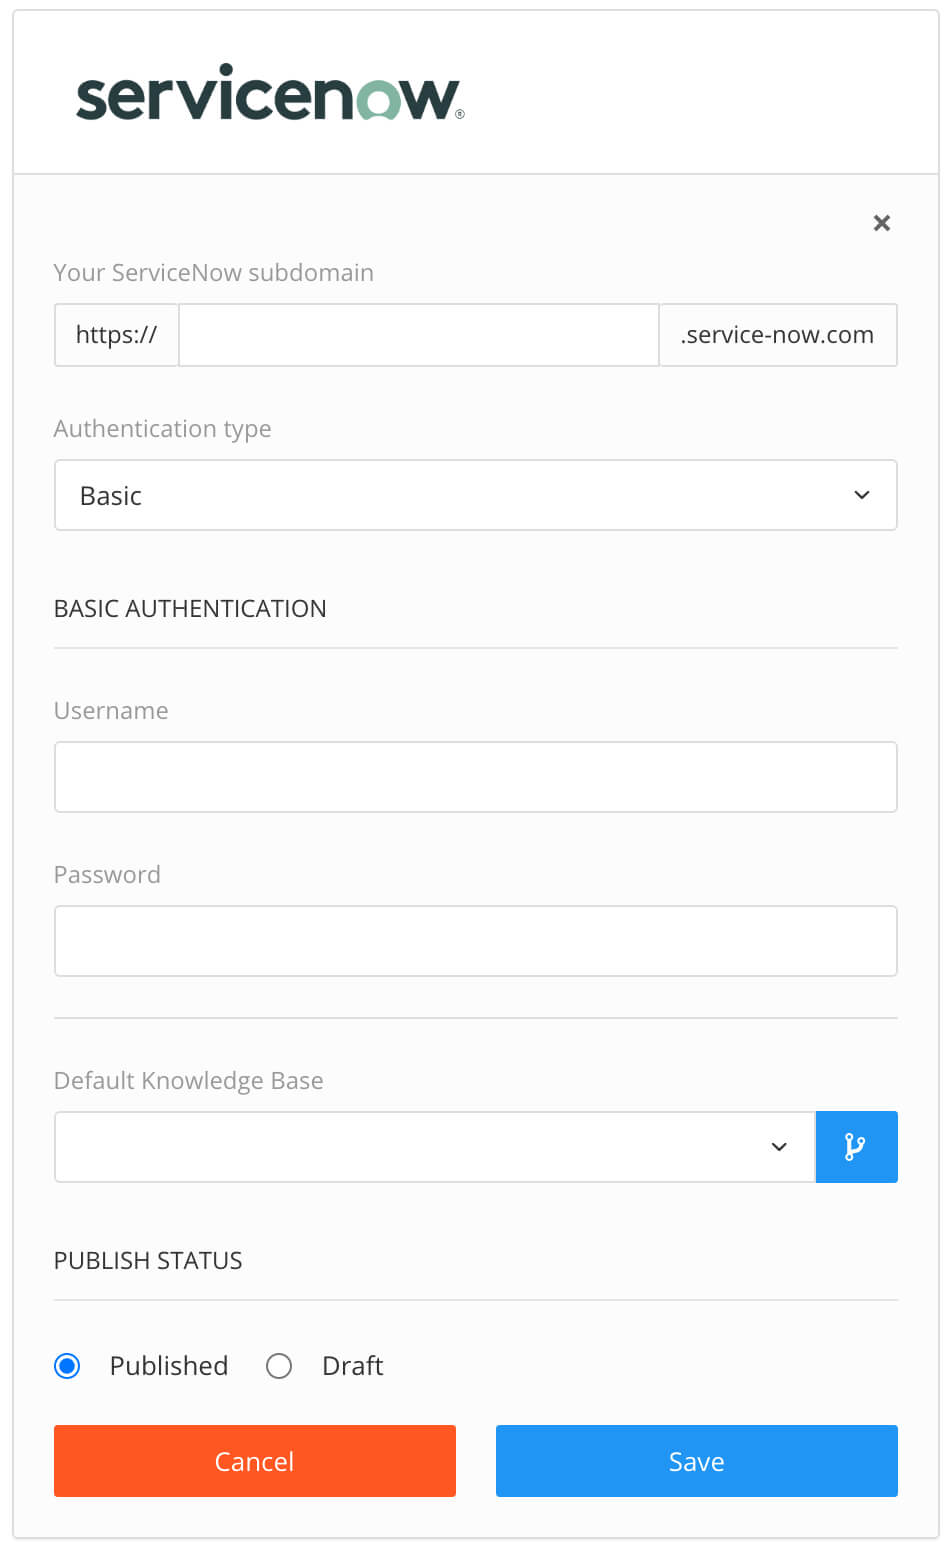 ServiceNow integration dialog with settings for URL, authentication type, username, password, default knowledgebase and publishing status.